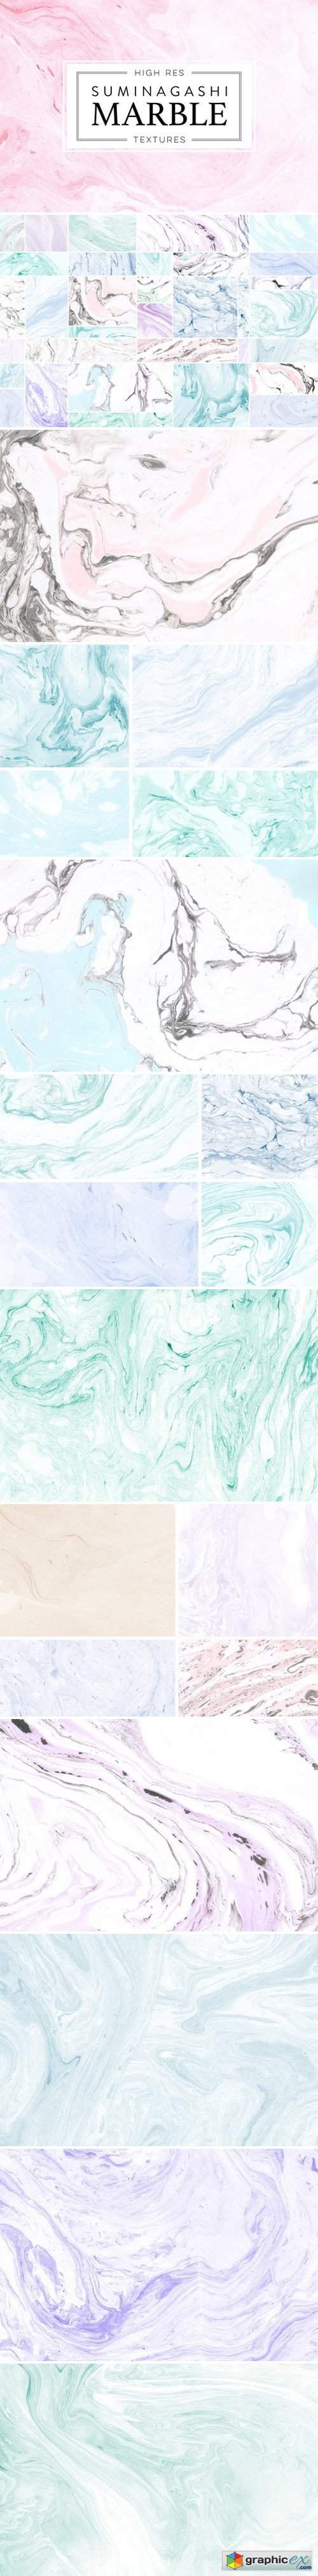 Marble Paper Textures 3